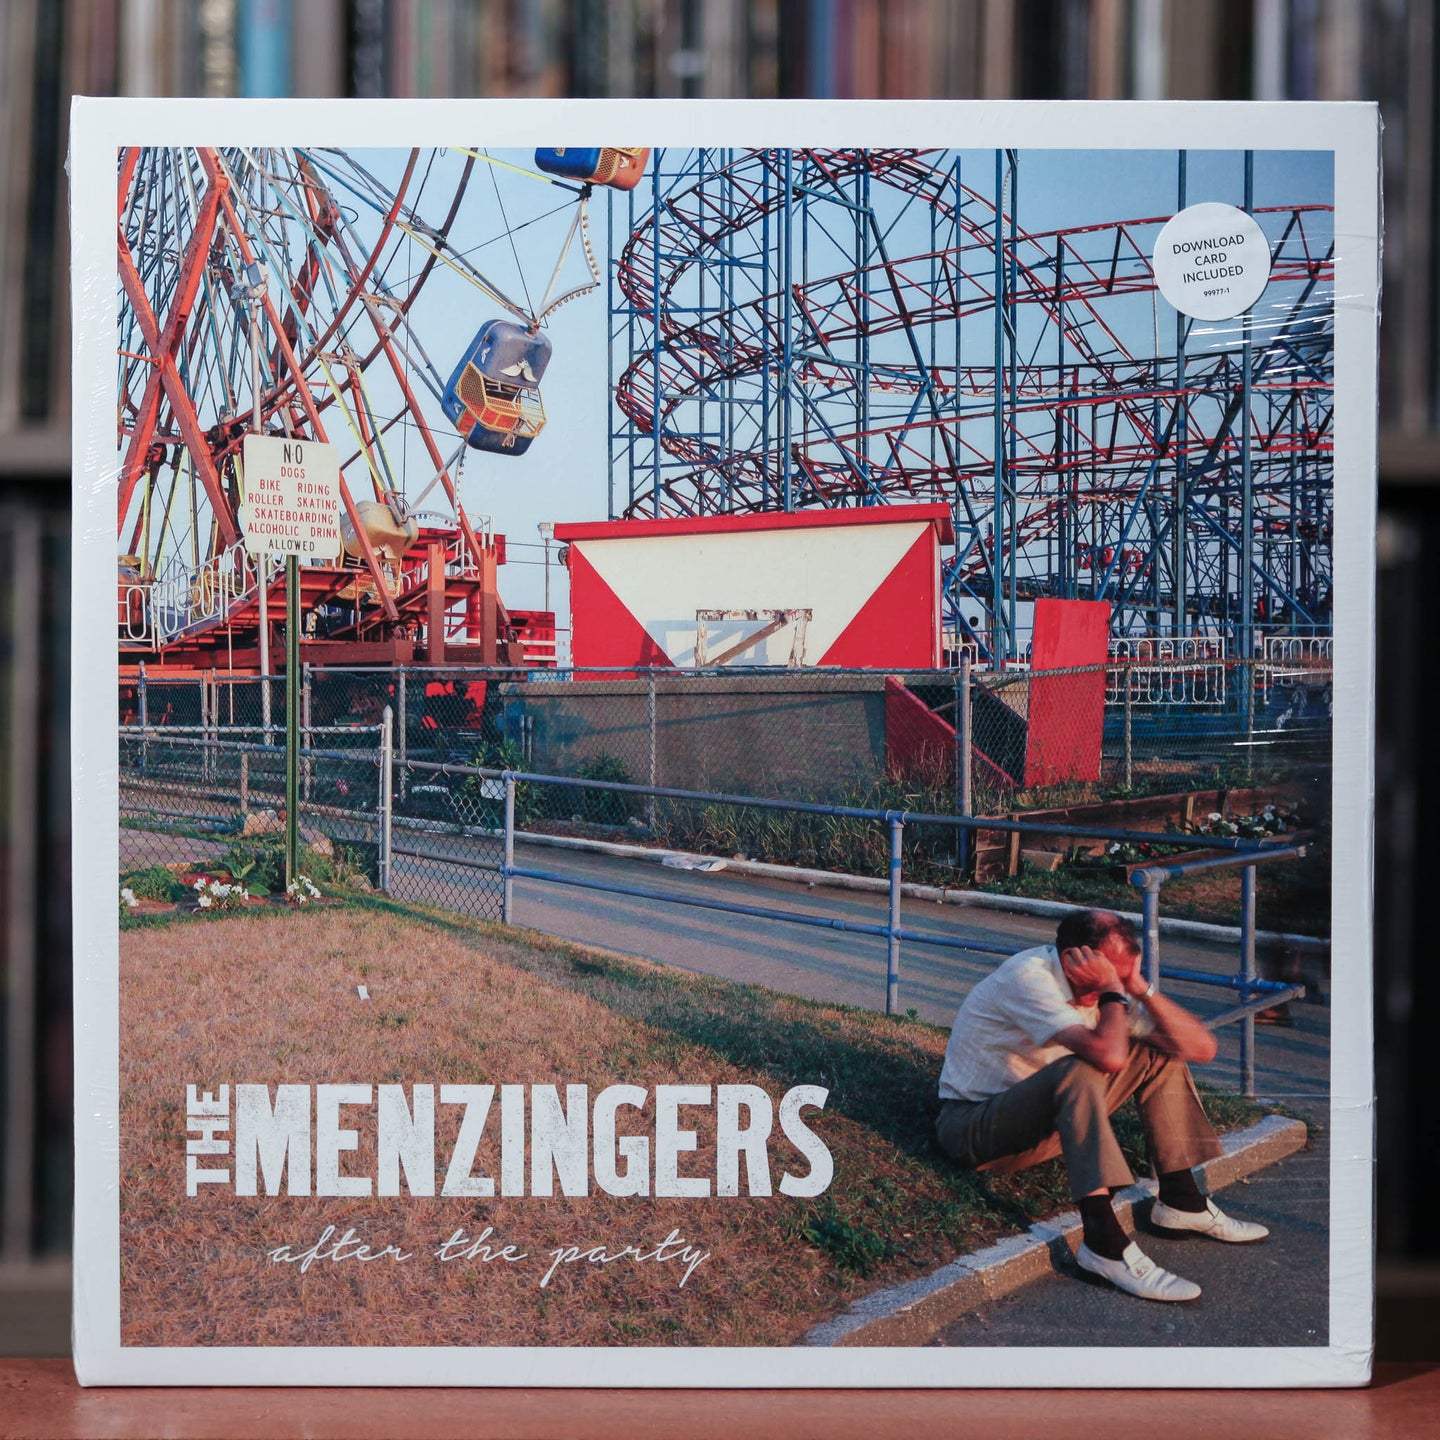 The Menzingers - After The Party - 2017 Epitaph, SEALED